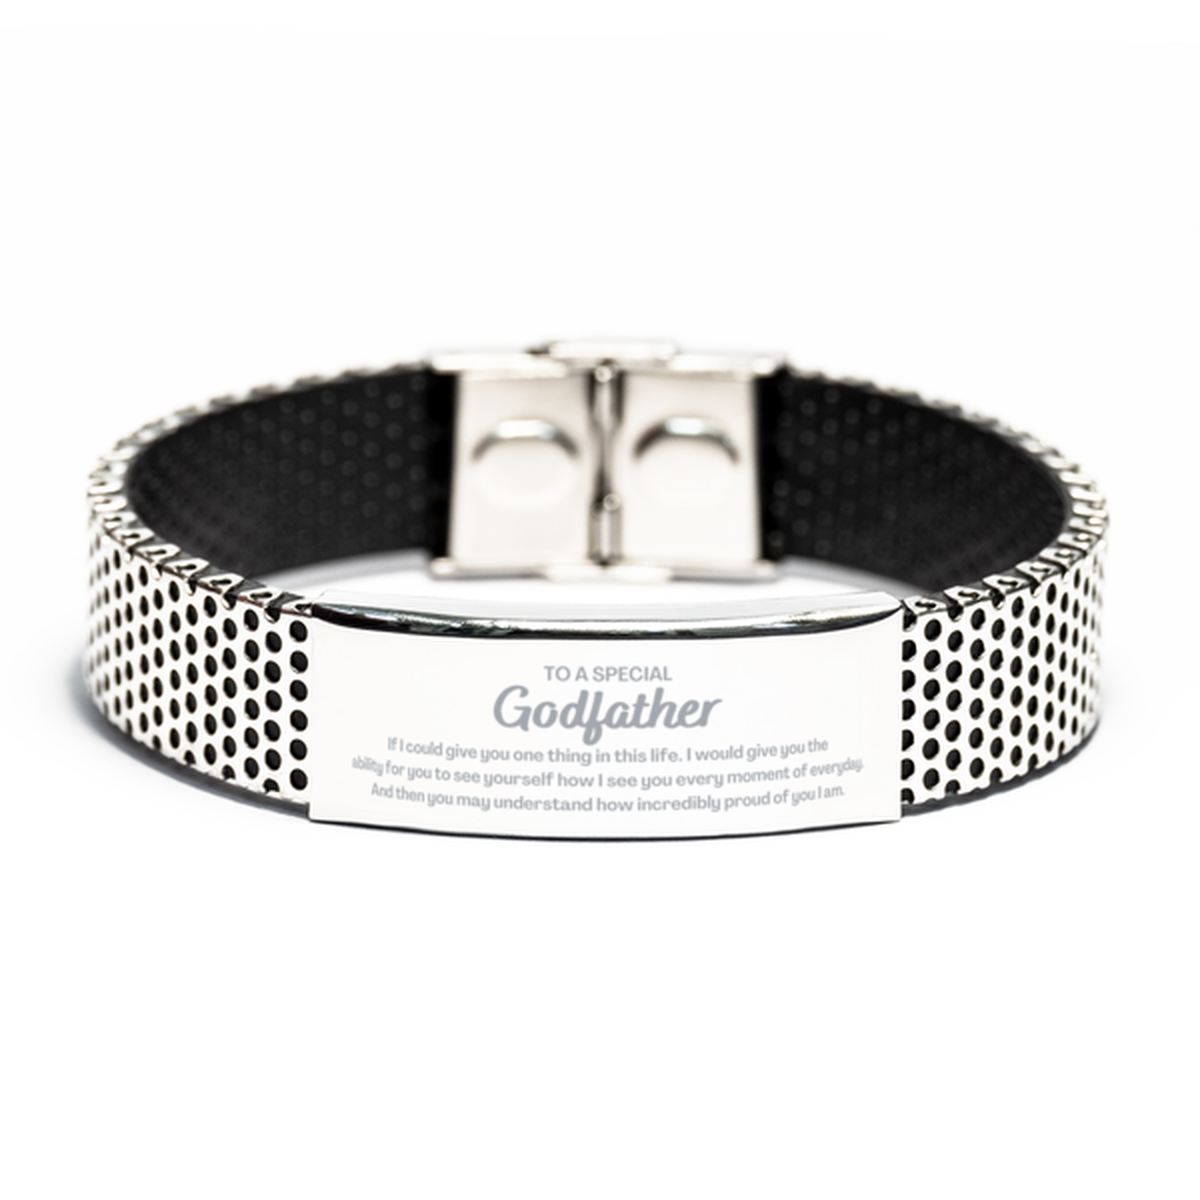 To My Godfather Stainless Steel Bracelet, Gifts For Godfather Engraved, Inspirational Gifts for Christmas Birthday, Epic Gifts for Godfather To A Special Godfather how incredibly proud of you I am